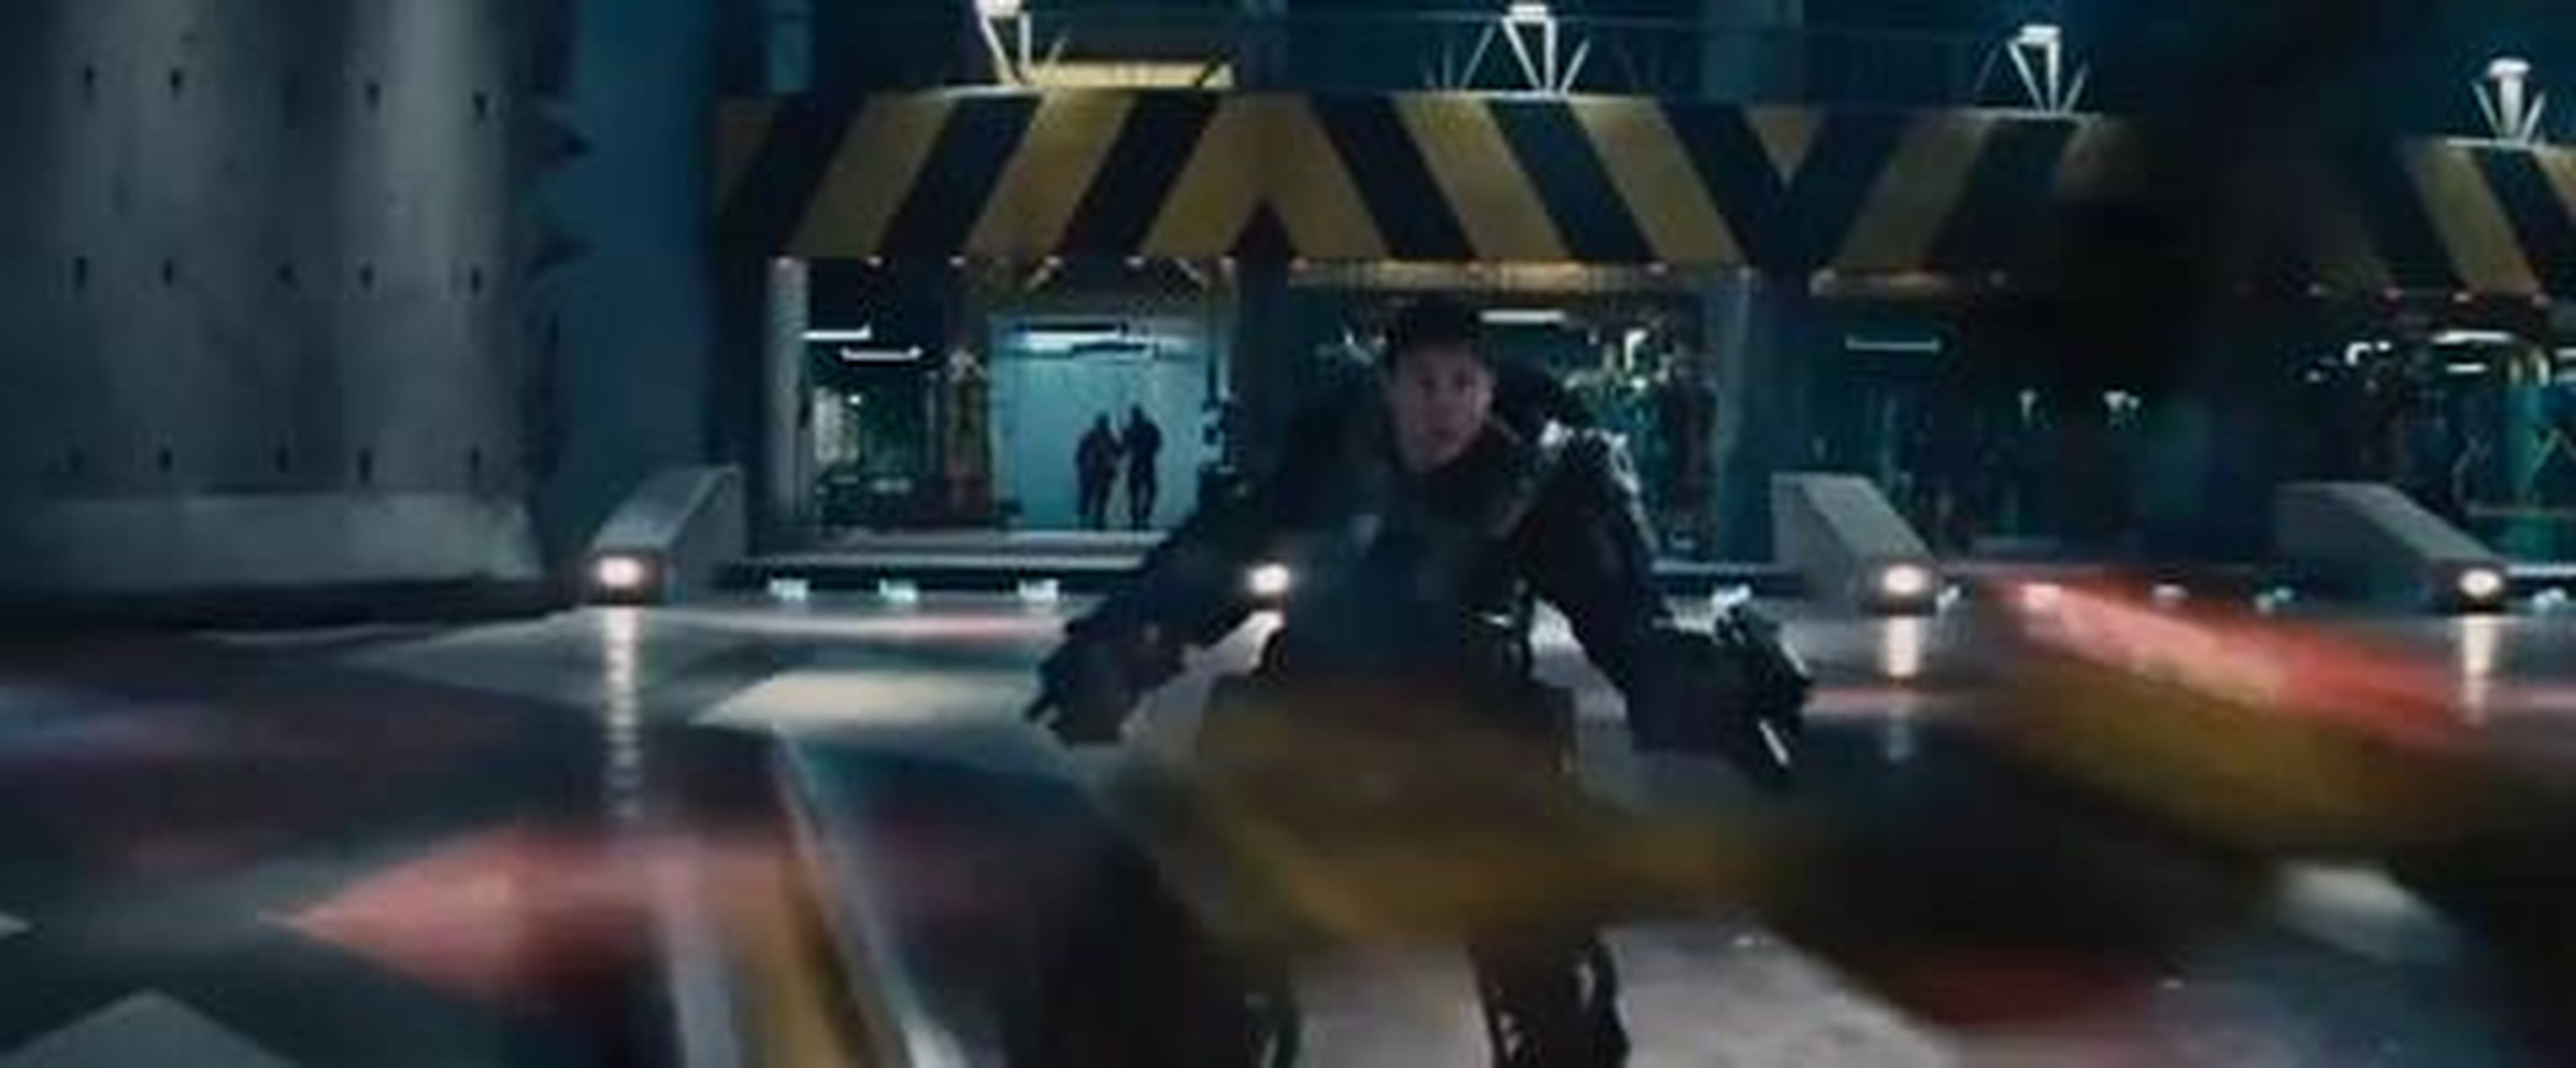 Edge of Tomorrow - Official Extended Trailer (2014) [HD] Tom Cruise, Emily Blunt